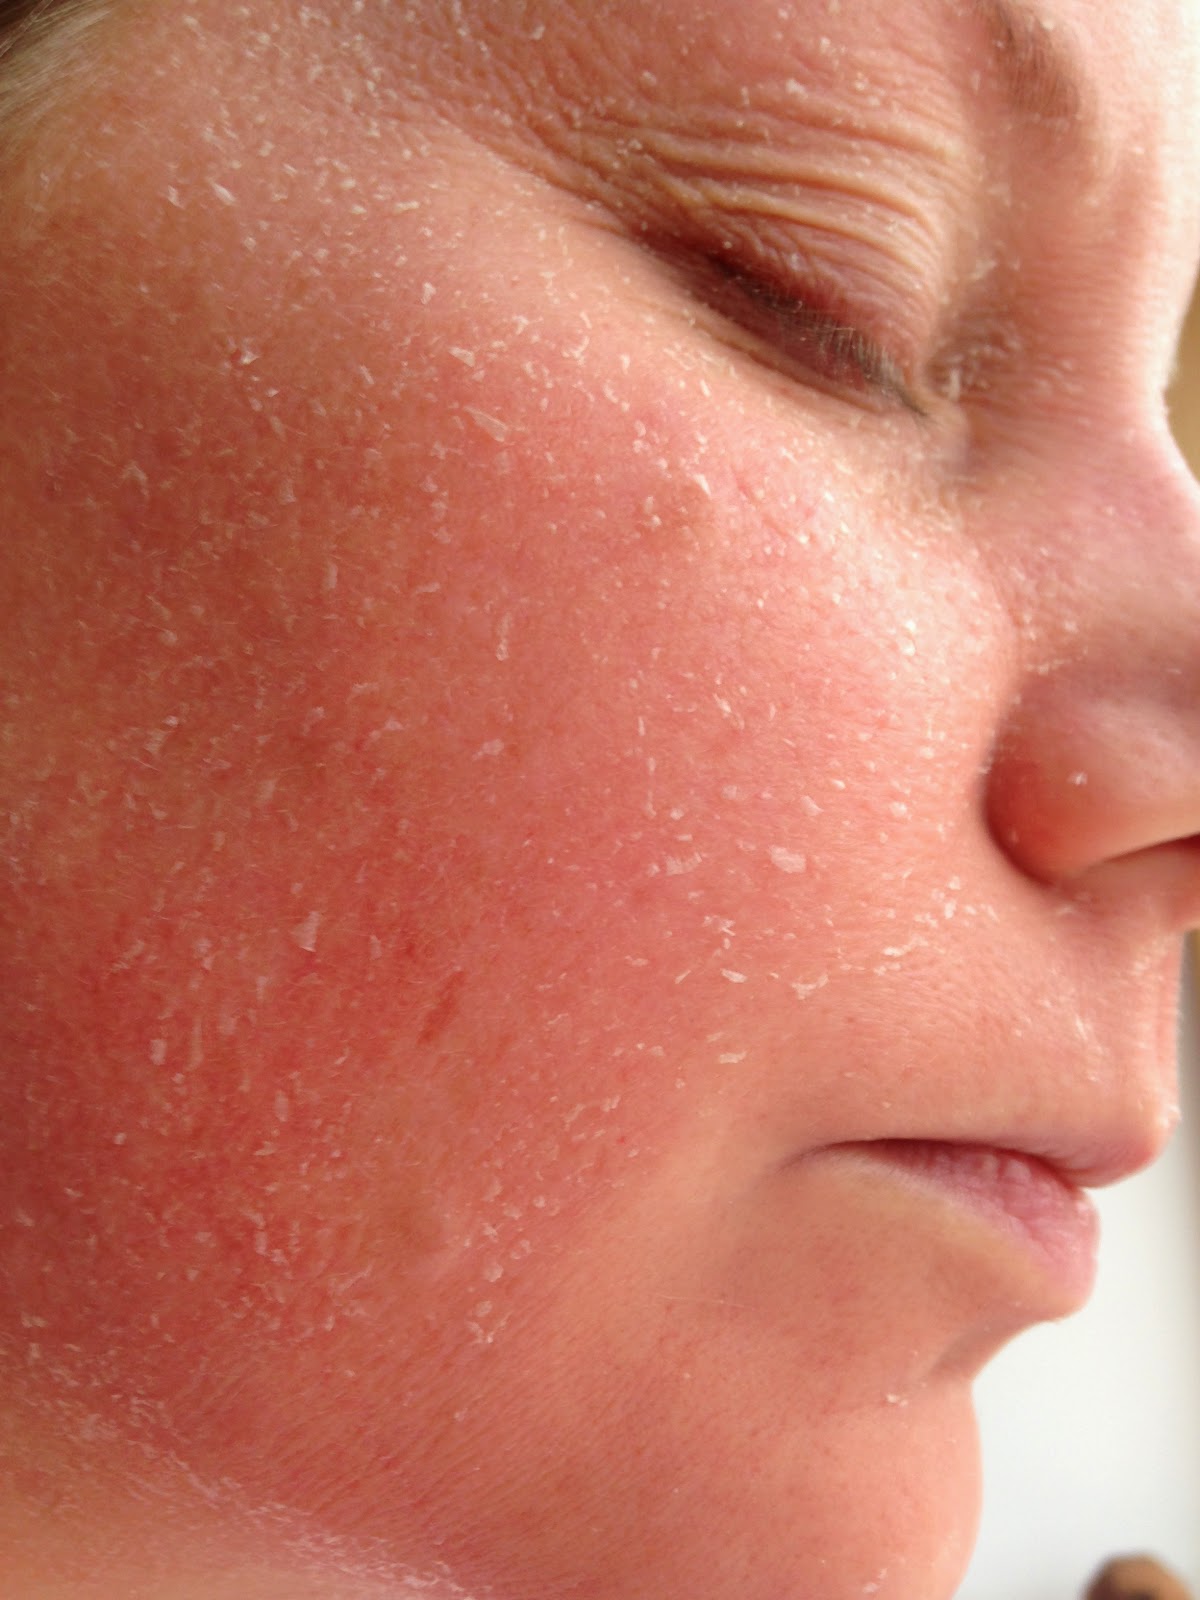 My Obagi Nu-Derm experience : Week 2 - My face is settling to a pink ...